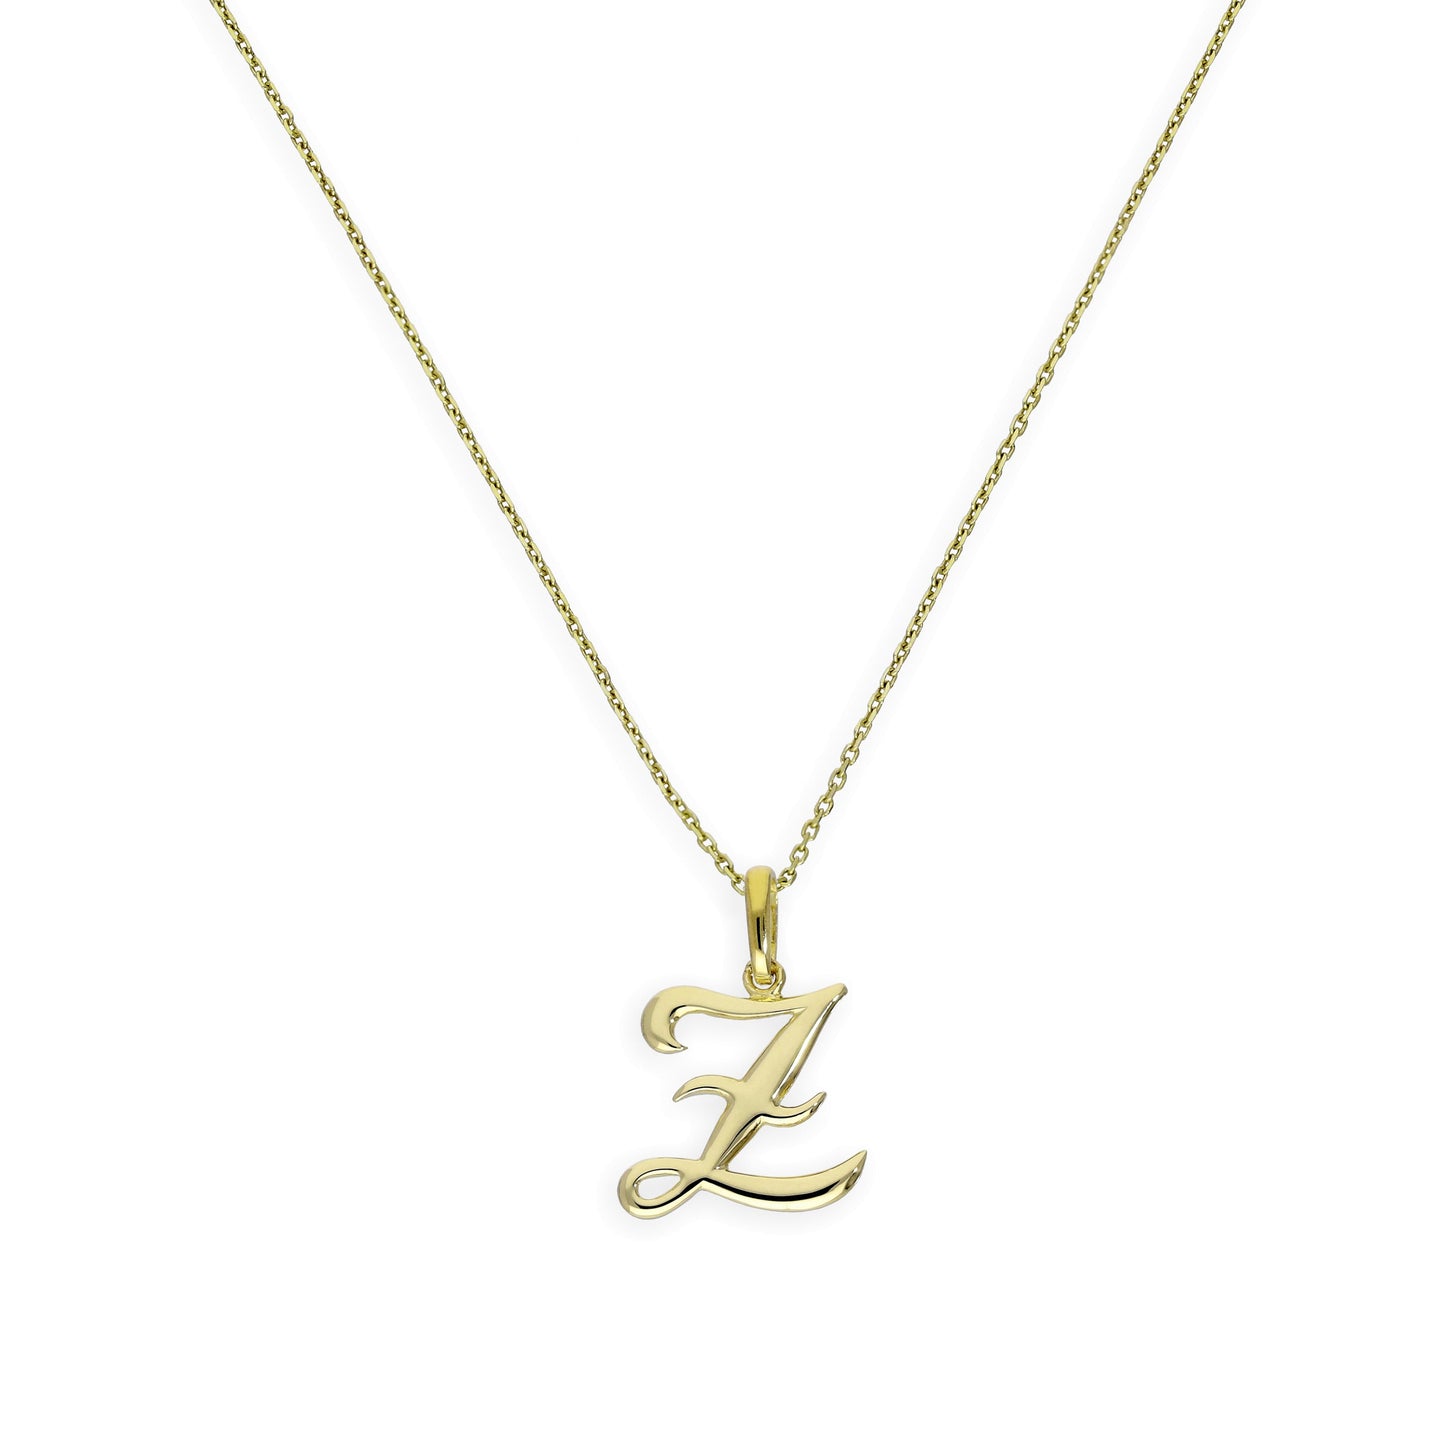 9ct Gold Fancy Calligraphy Script Letter Z Pendant Necklace 16 - 20 Inches